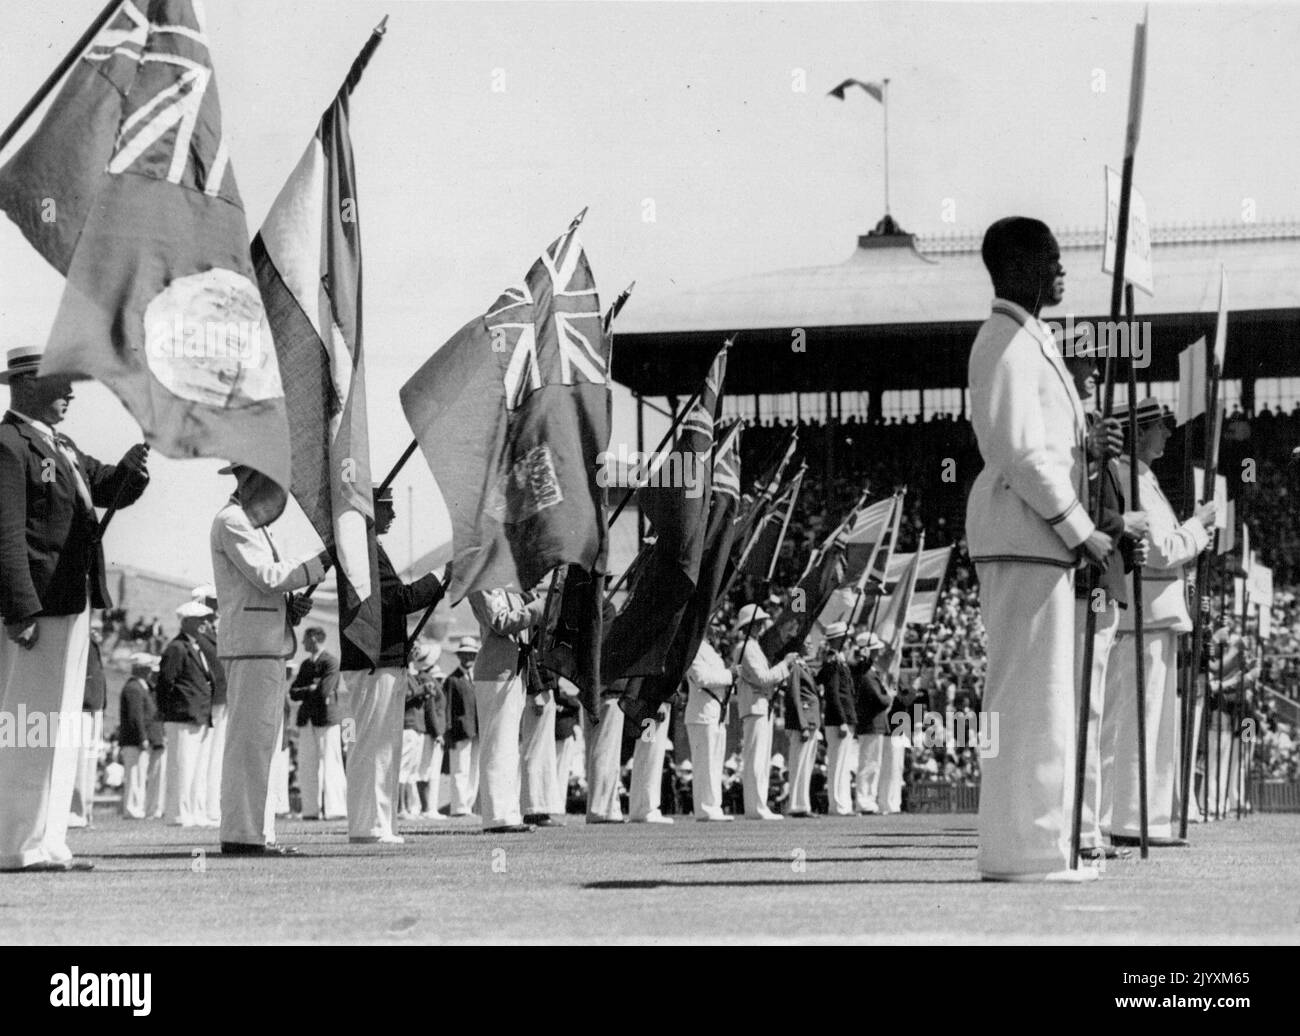 Empire Games at Sydney Cricket Ground Flags of nations of the Empire colored the Sydney Cricket Ground when Australia's first Empire Games were opened before the Covernor of New South Wales, Lord Wakehurst. While bands played and trumpeters sounded, the comes were launched before a huge crowd. July 18, 1938. Stock Photo